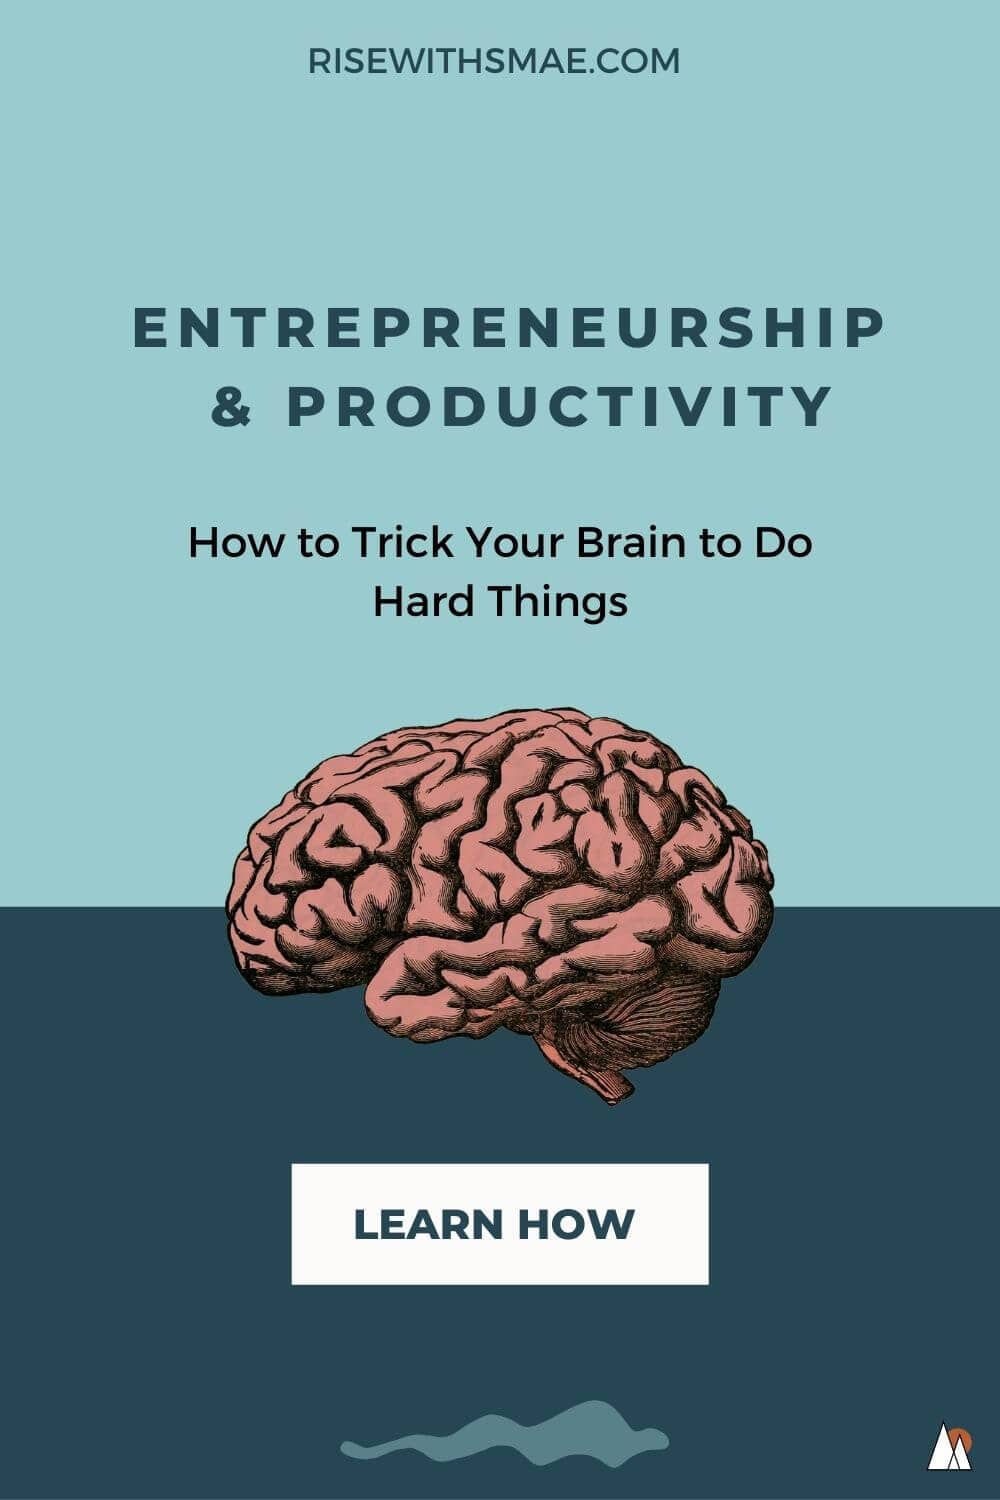 Entrepreneurship and Productivity: 5 Easy Ways Trick Your Brain to Do Hard Things